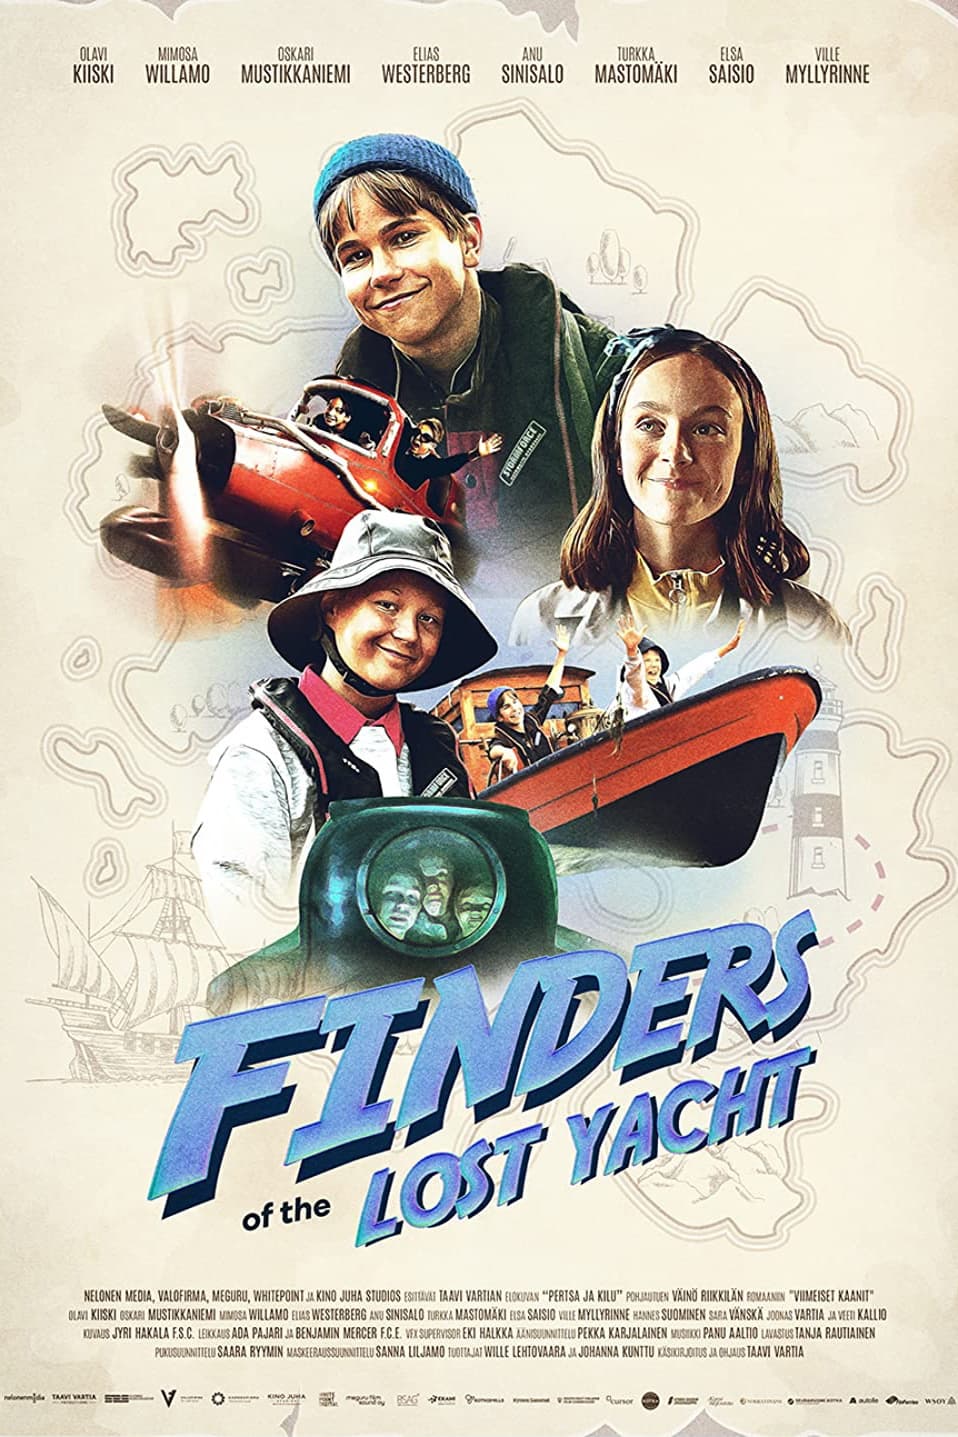 Finders of the Lost Yacht (2021)